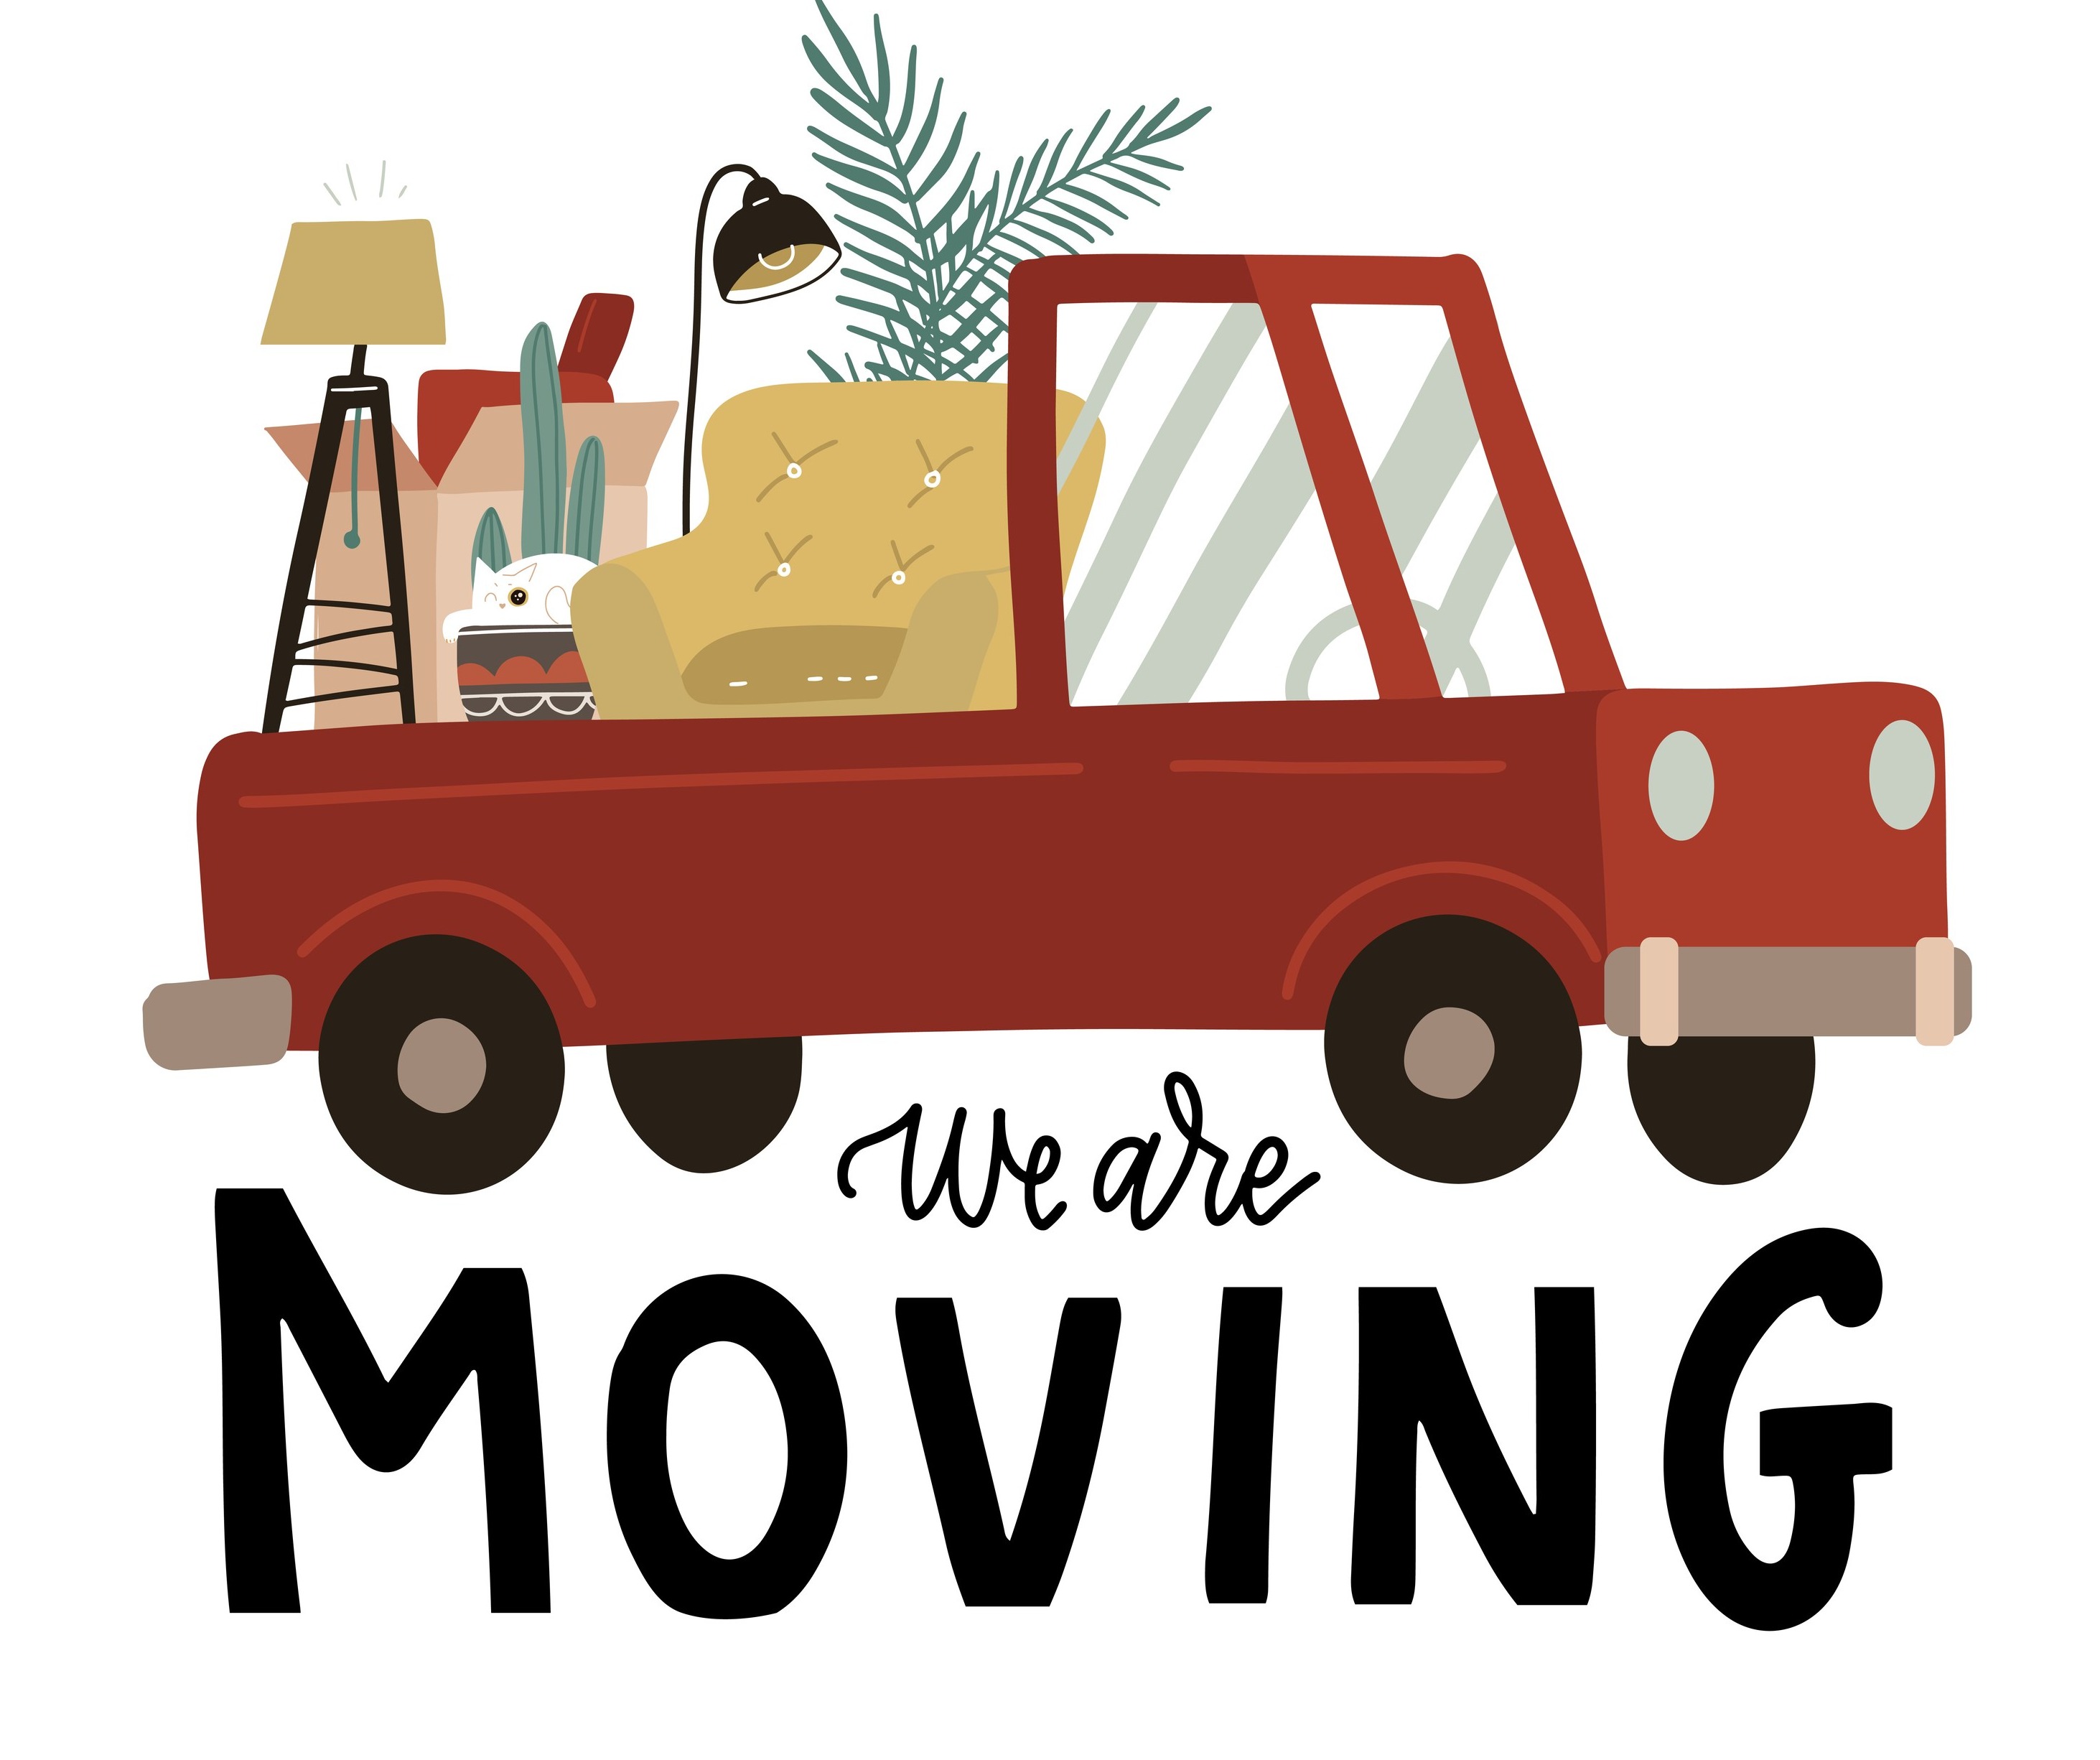 We are moving! 